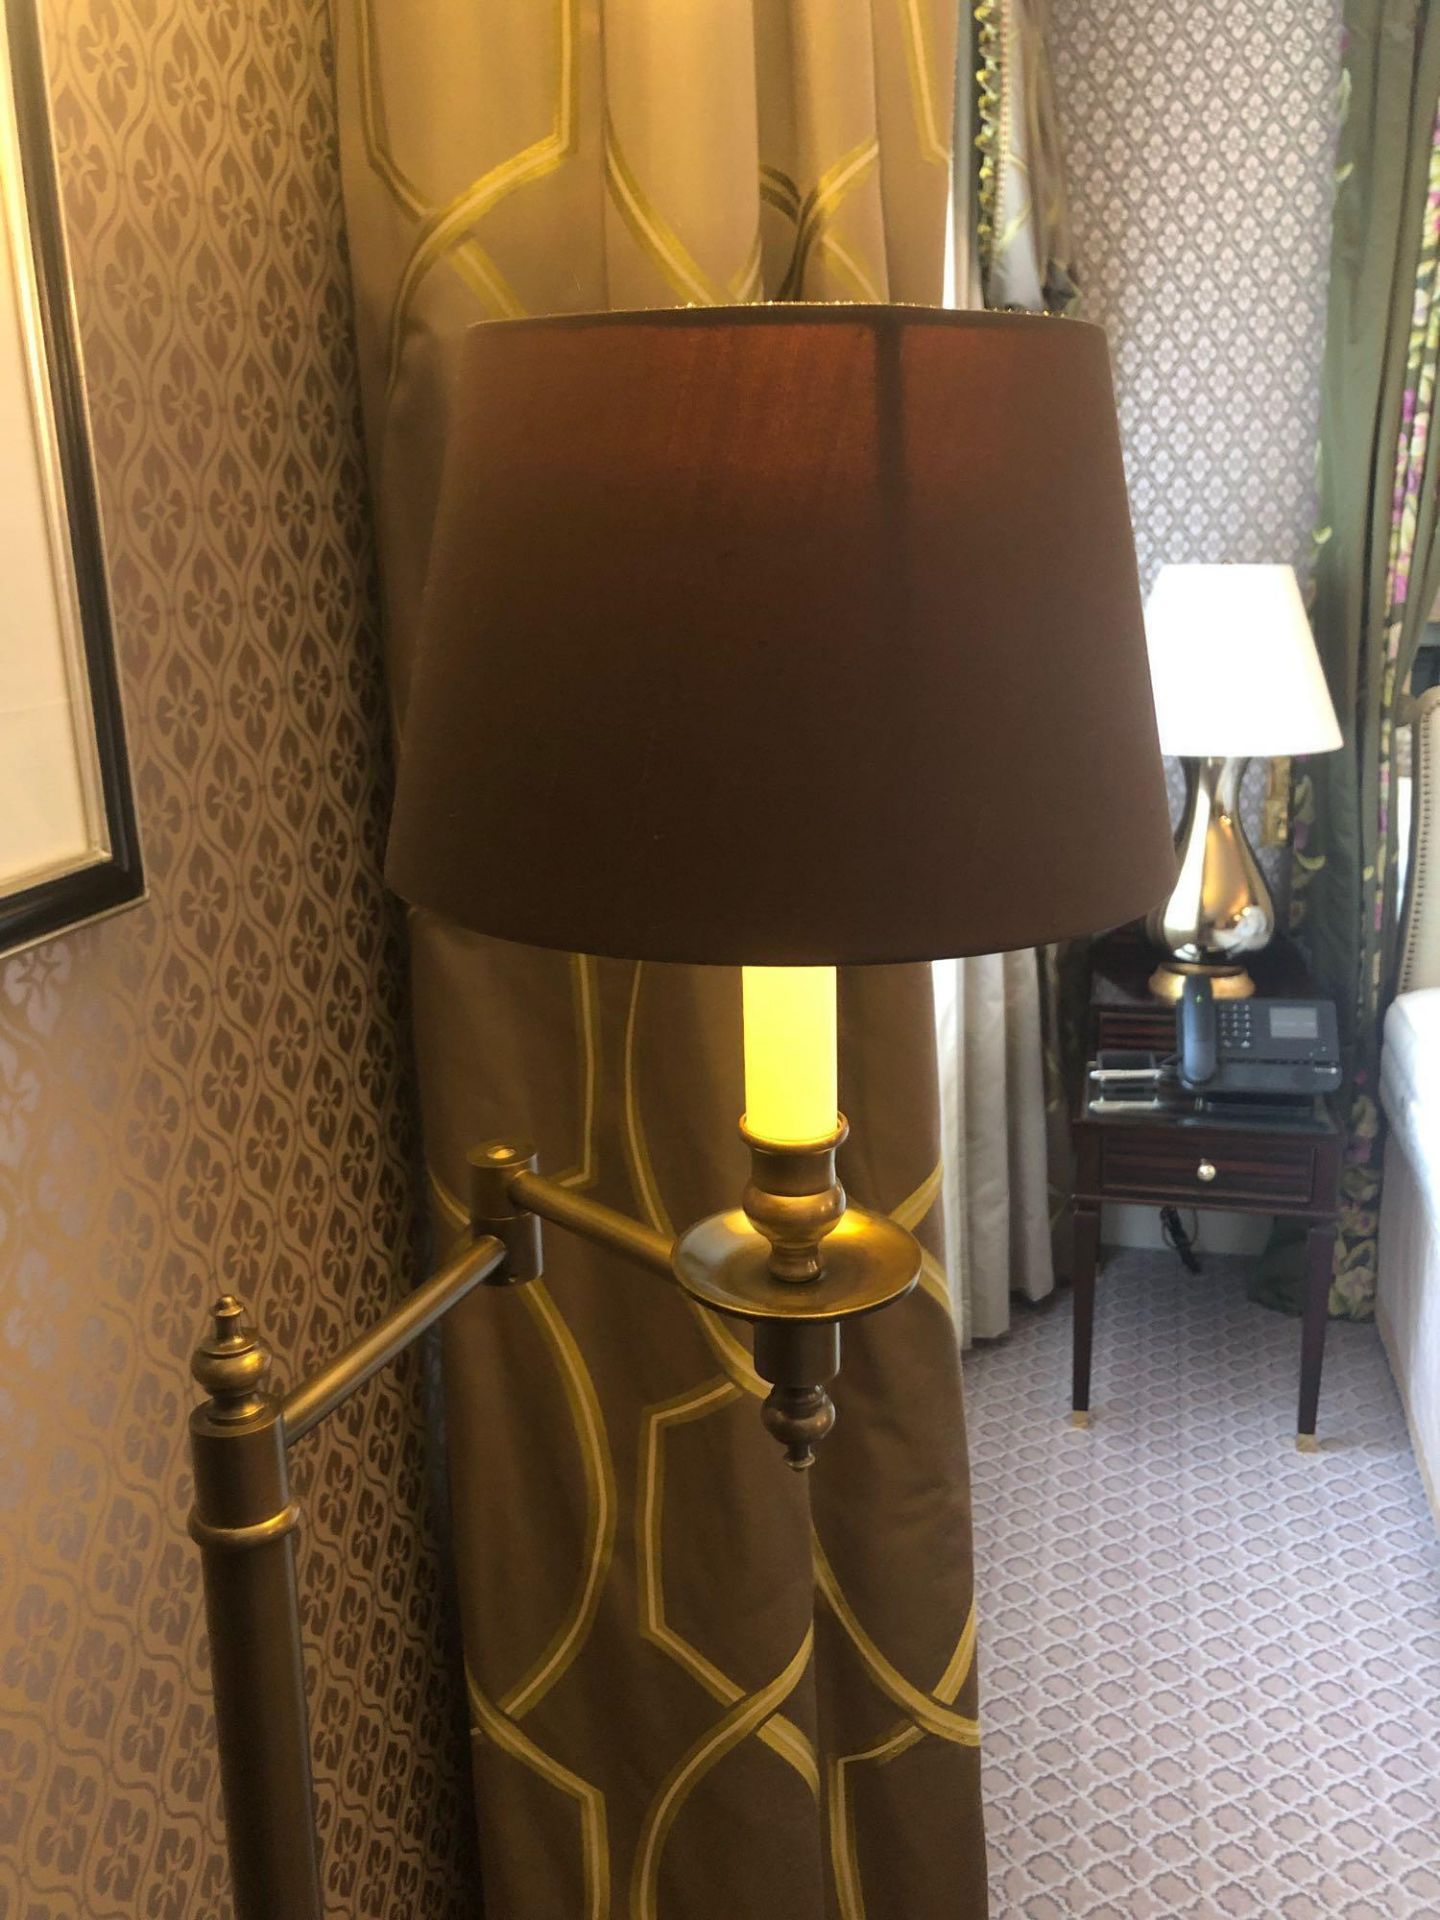 Library Floor Lamp Finished In English Bronze Swing Arm Function With Shade 156cm (Room 229) - Image 2 of 2